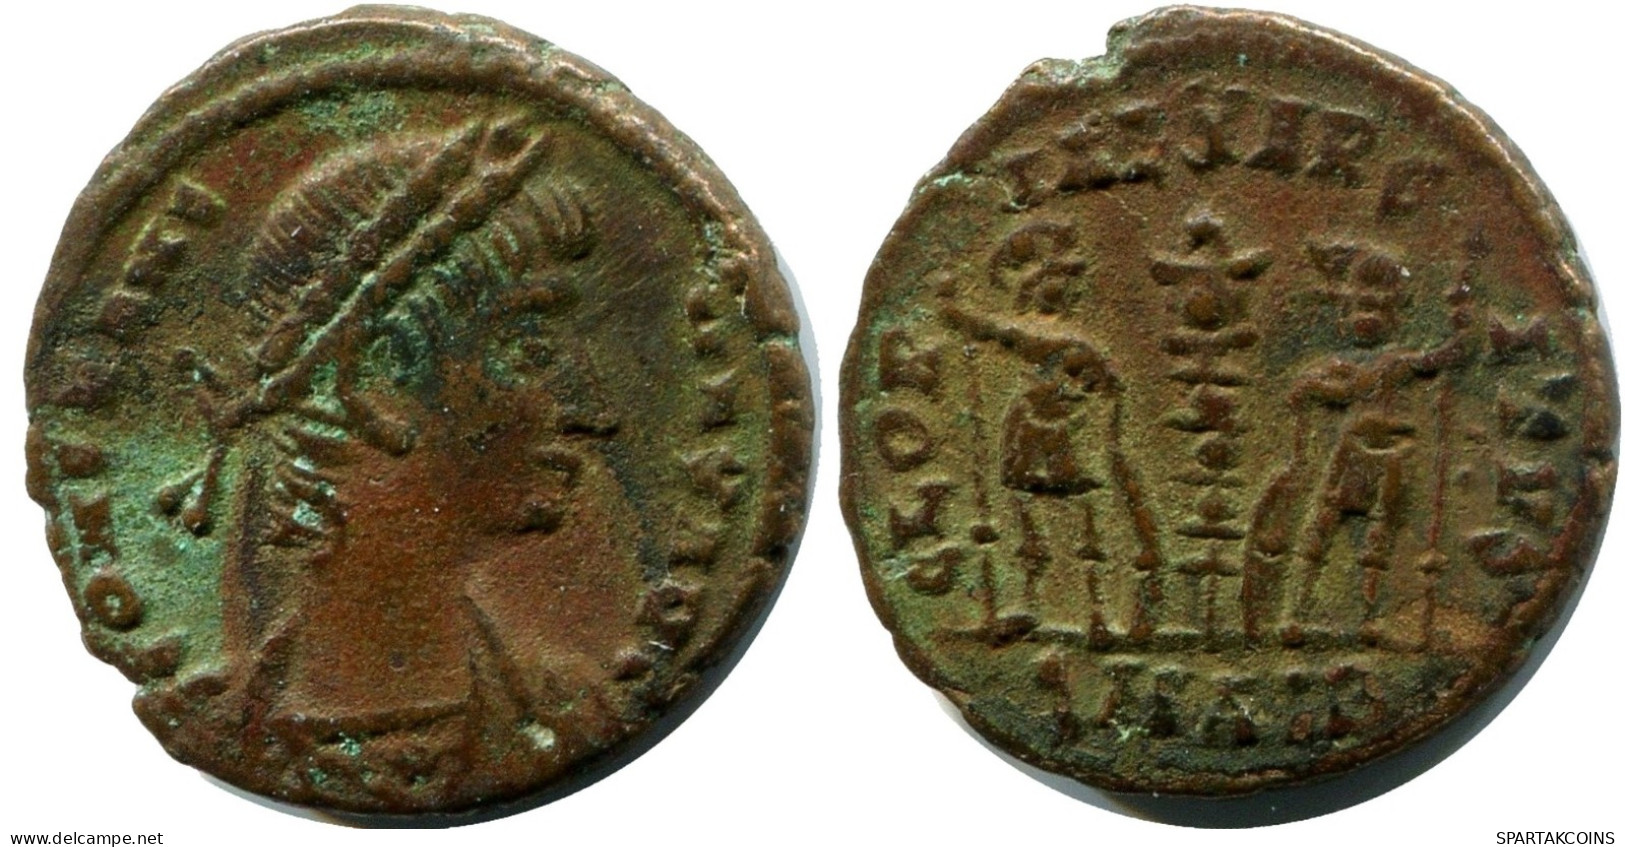 CONSTANS MINTED IN ALEKSANDRIA FROM THE ROYAL ONTARIO MUSEUM #ANC11394.14.D.A - L'Empire Chrétien (307 à 363)